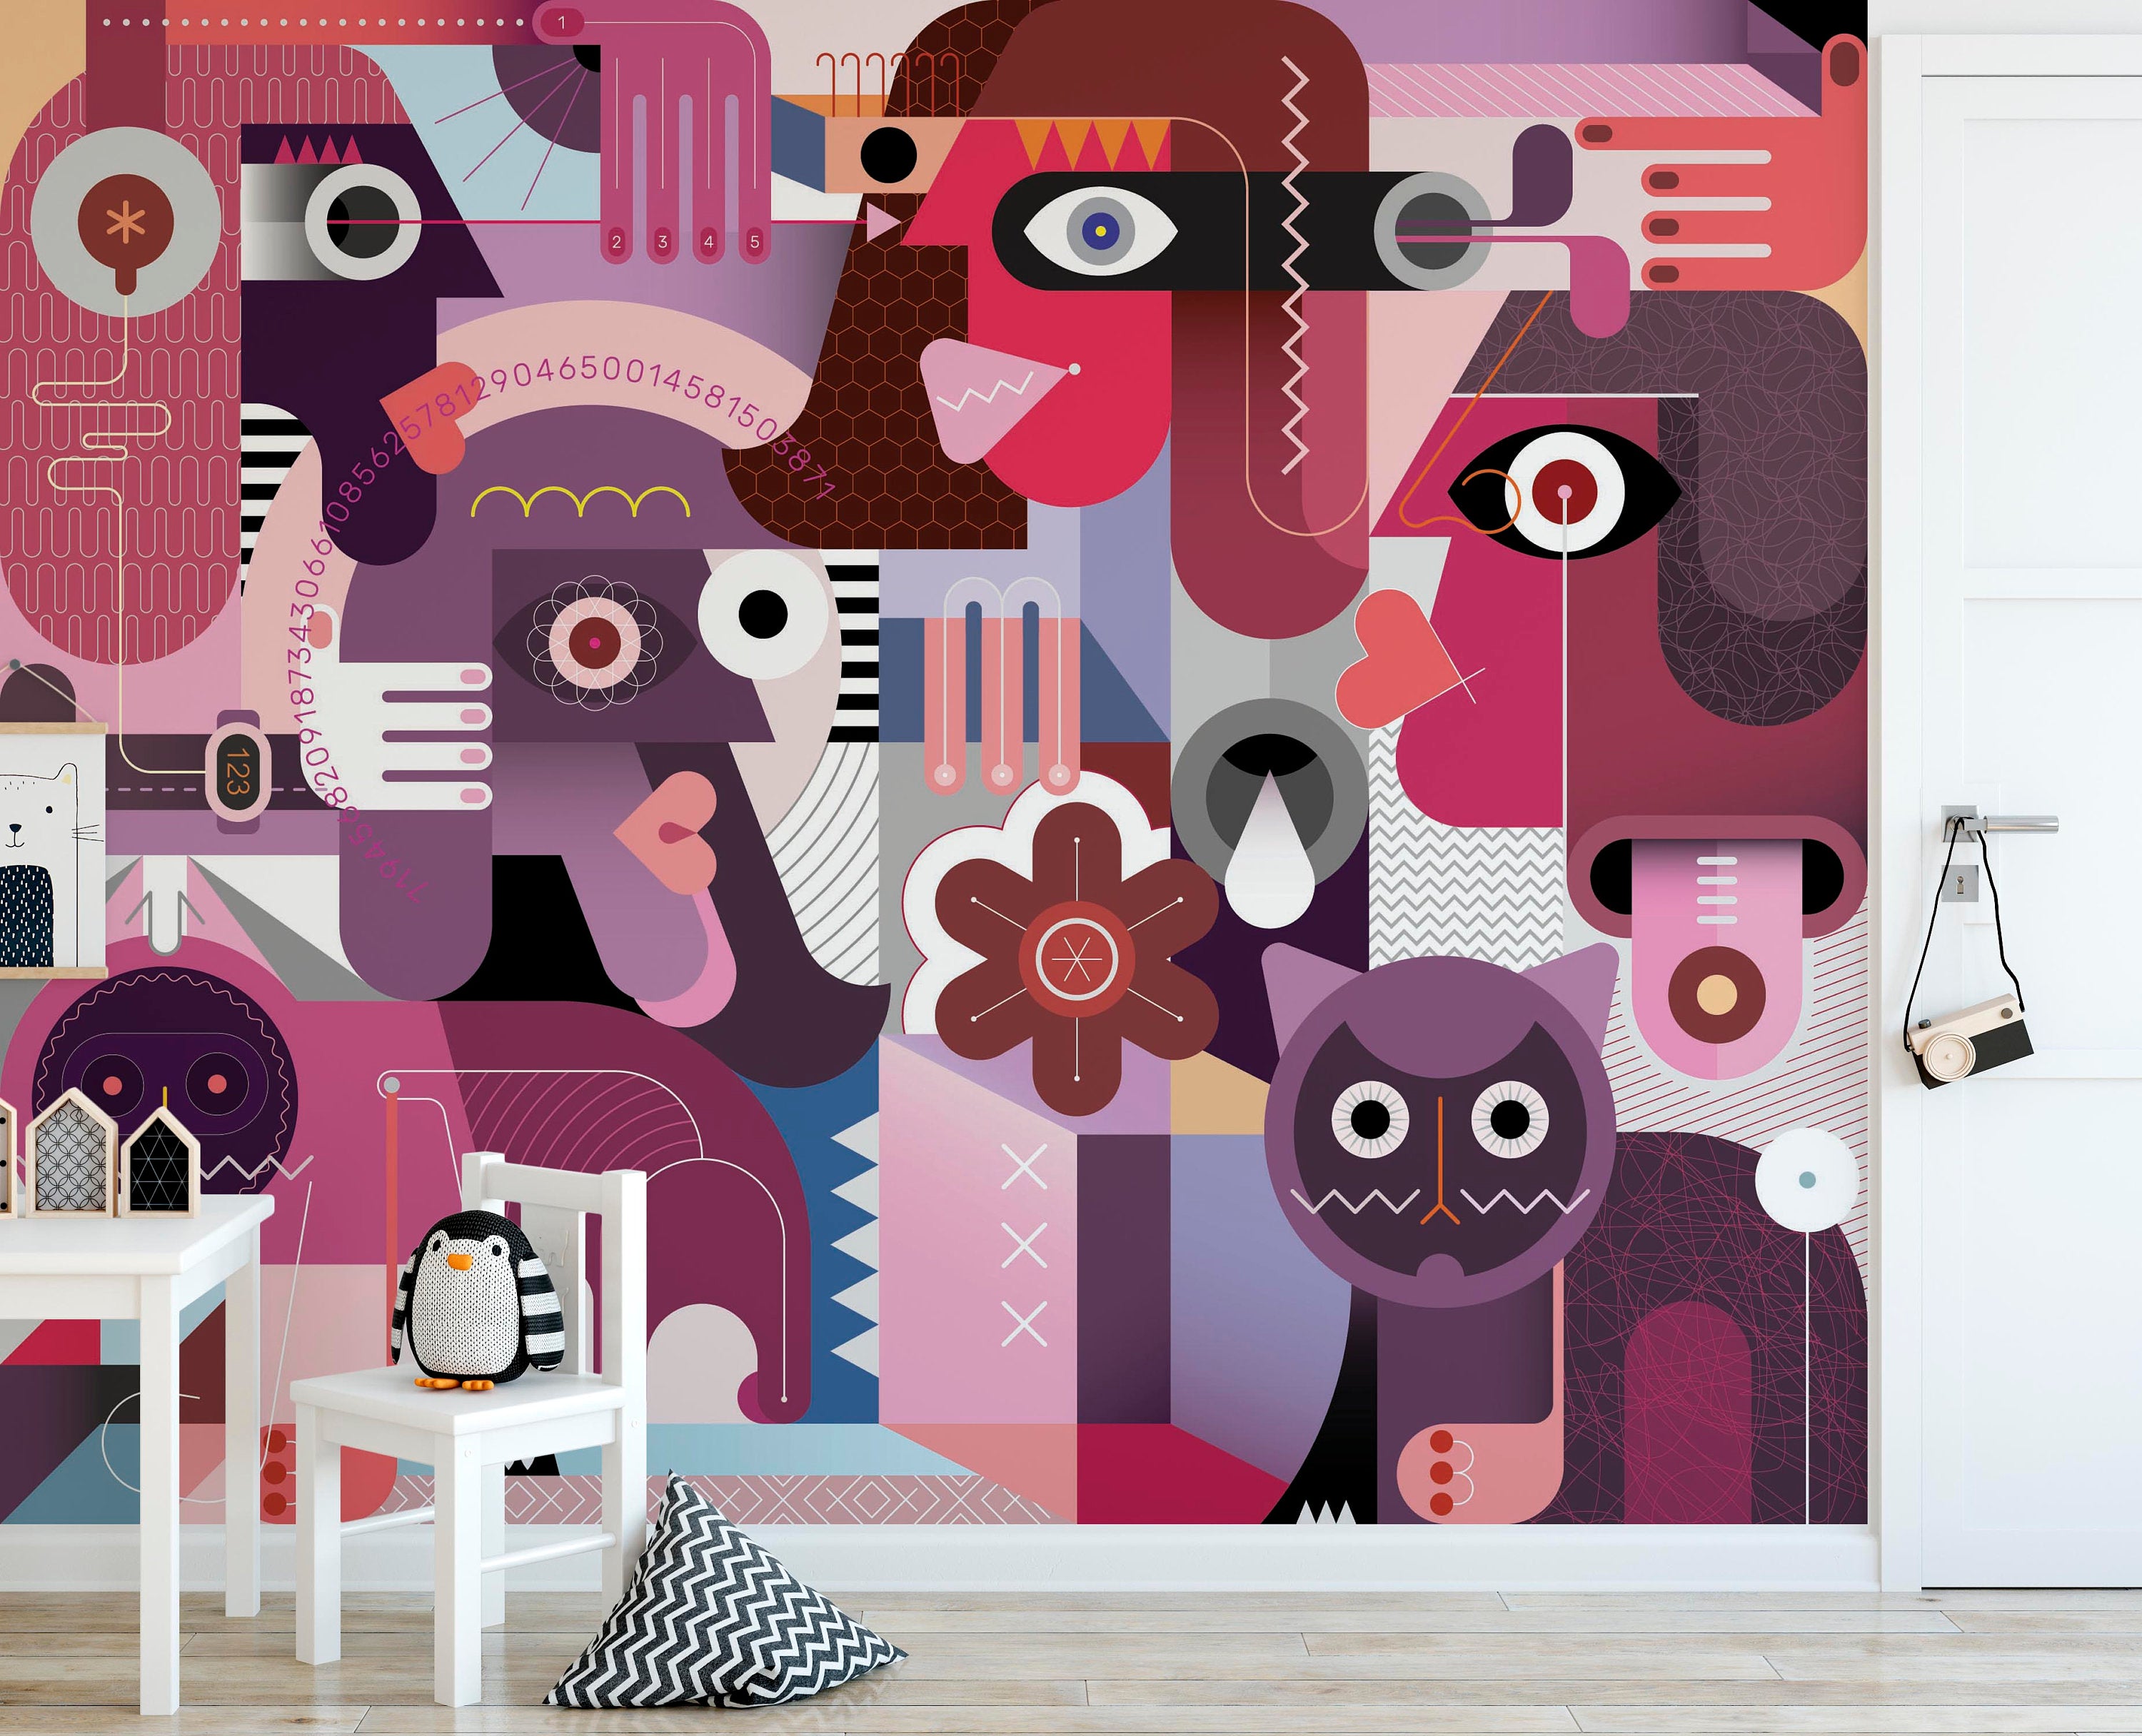 People Cats Modern Abstract Neo Cubism Artwork Wallpaper Kids Room Nursey Self Adhesive Peel & Stick Wall Decoration Scandinavian Removable